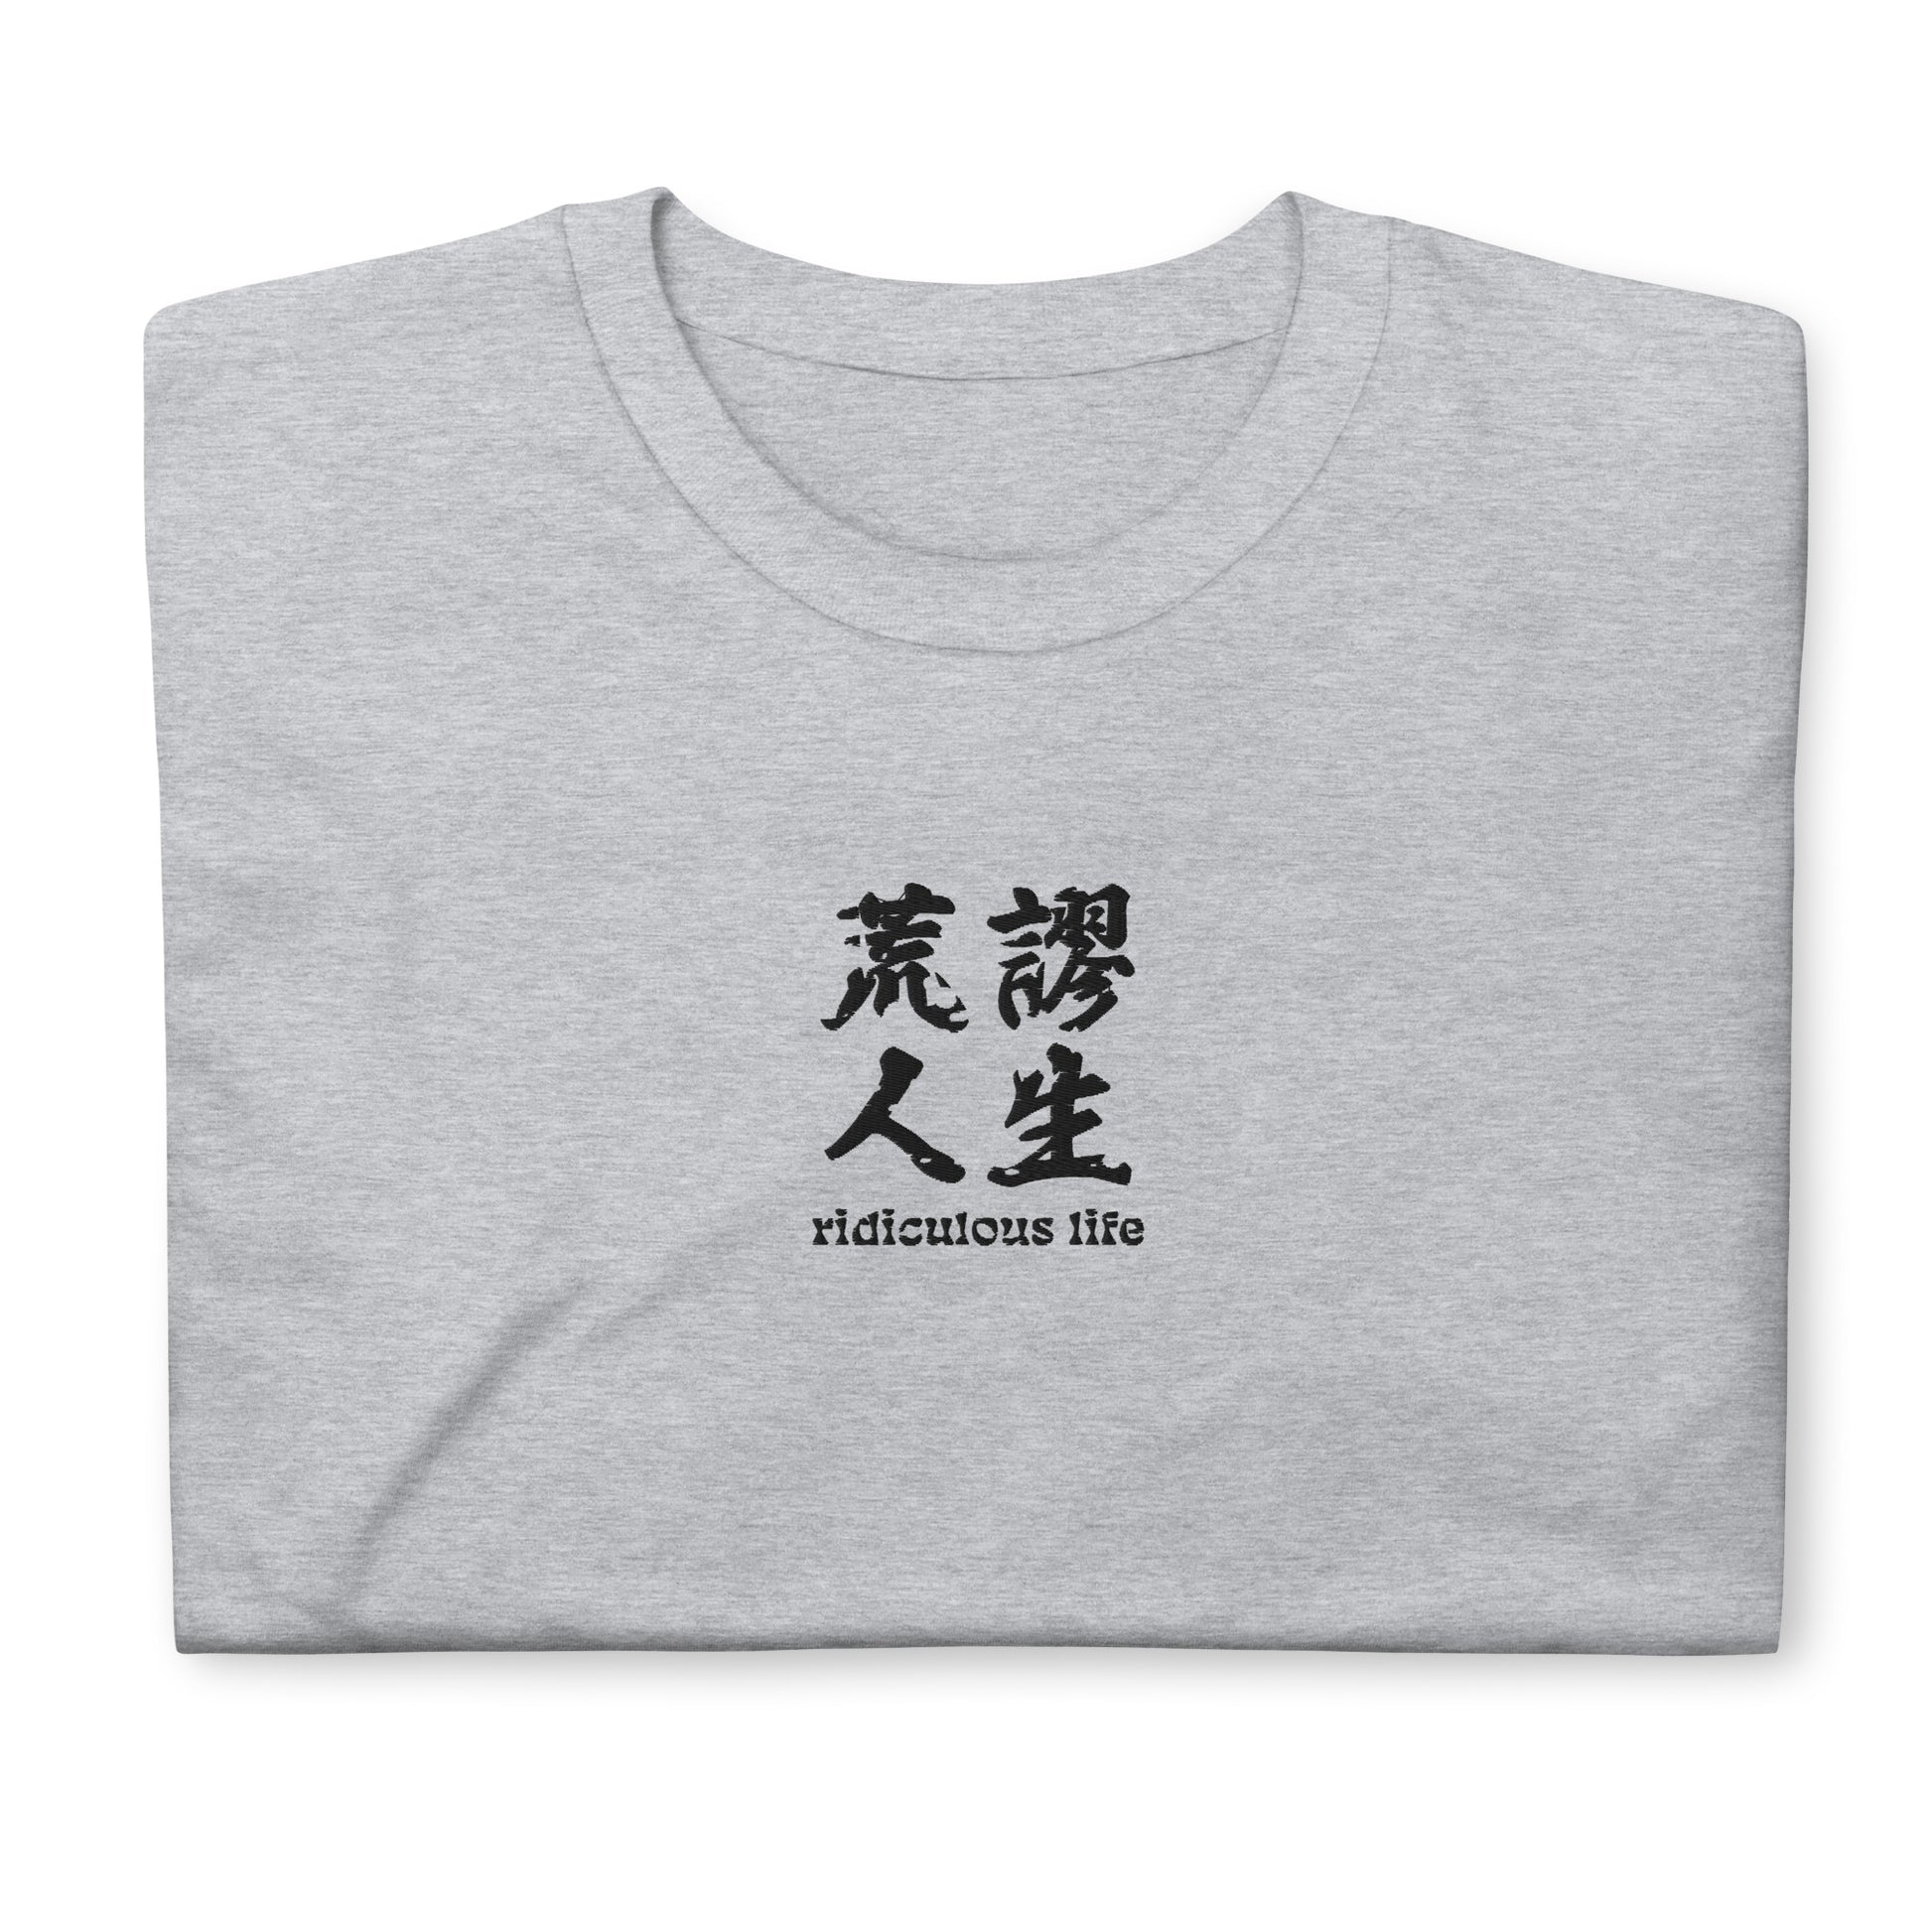 Light Gray High Quality Tee - Front Design with an Black Embroidery "Ridiculous Life" in Chinese and English